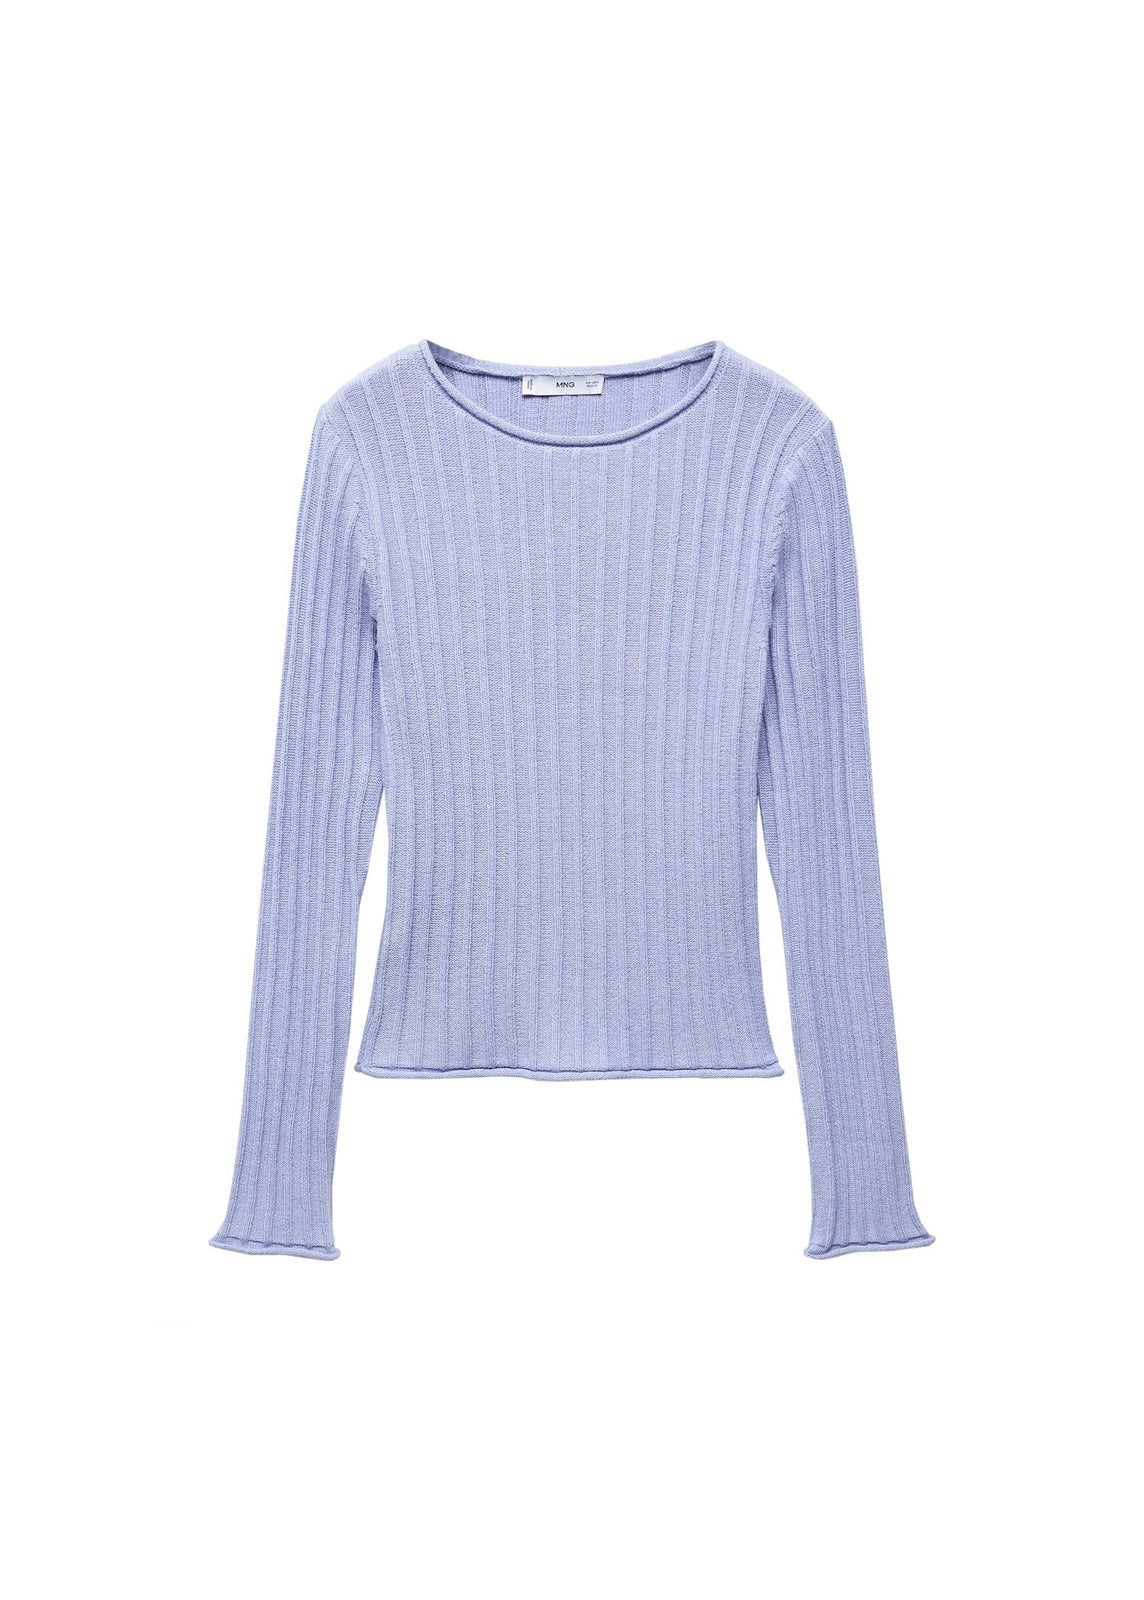 Mango Ribbed knit sweater 5 Shaws Department Stores